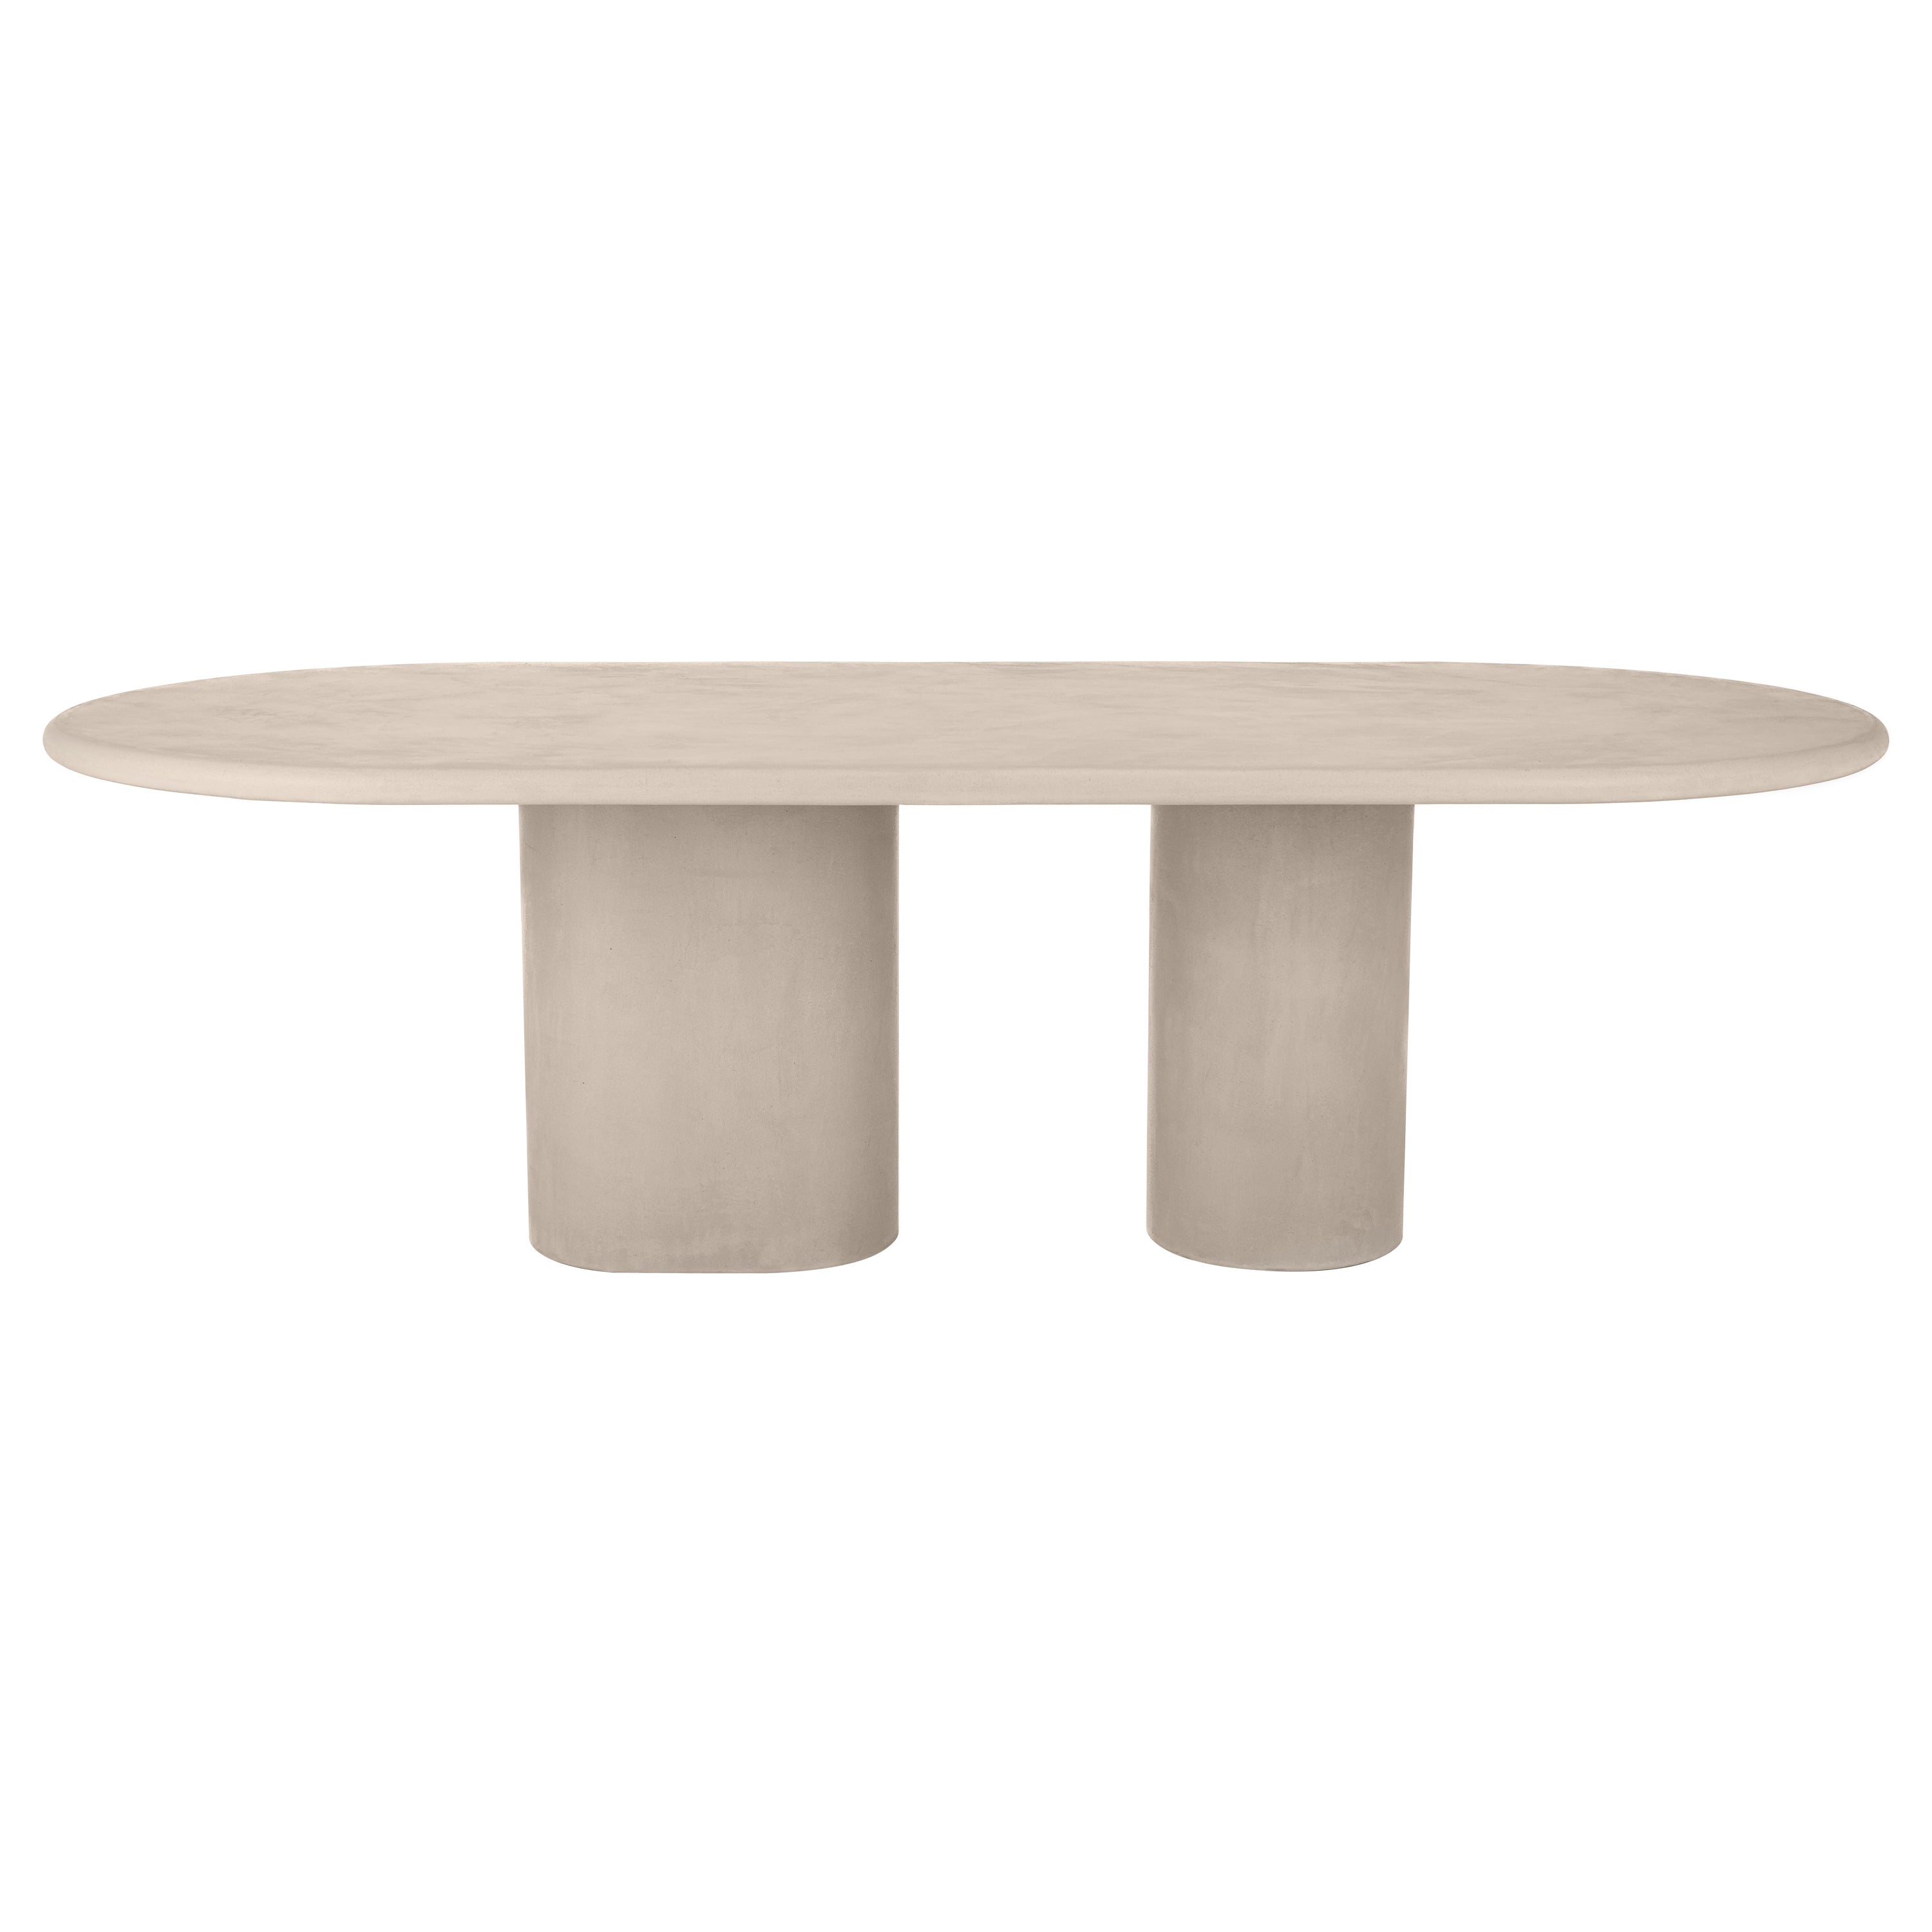 Mortex Dining Table "Column" 240 by Isabelle Beaumont For Sale